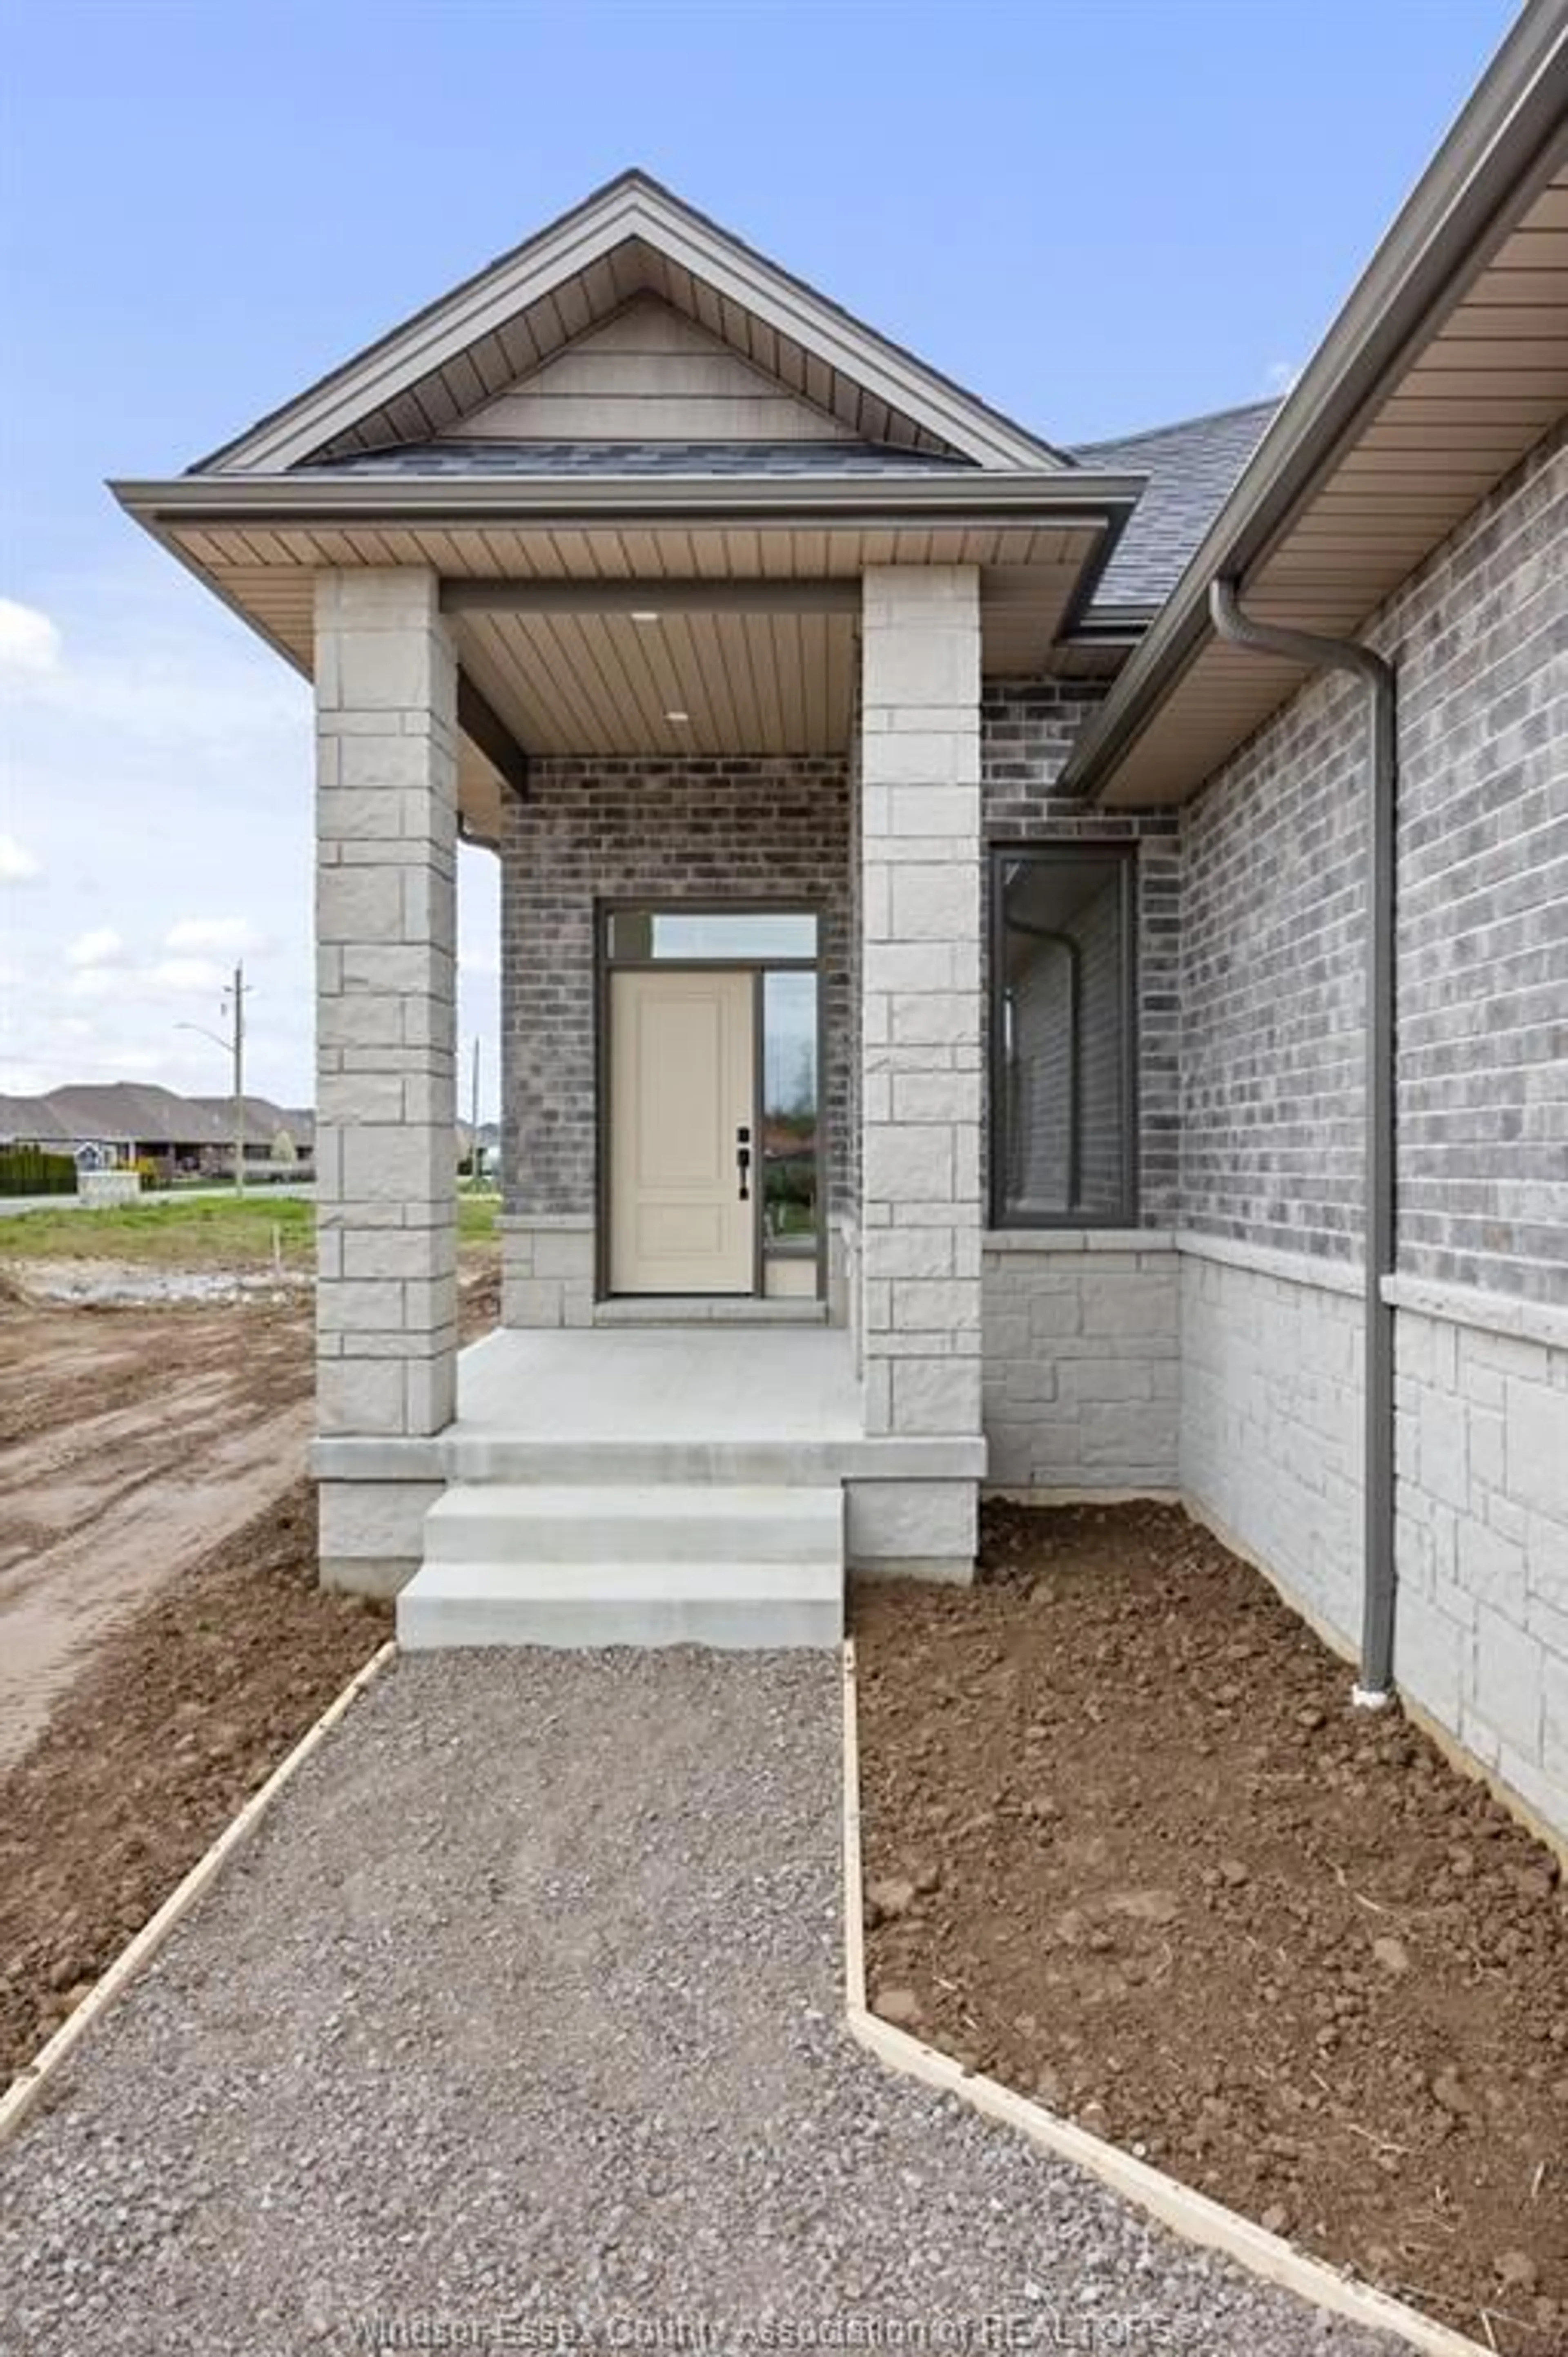 Home with brick exterior material for 50 GAFFAN Dr, Kingsville Ontario N9Y 3J5